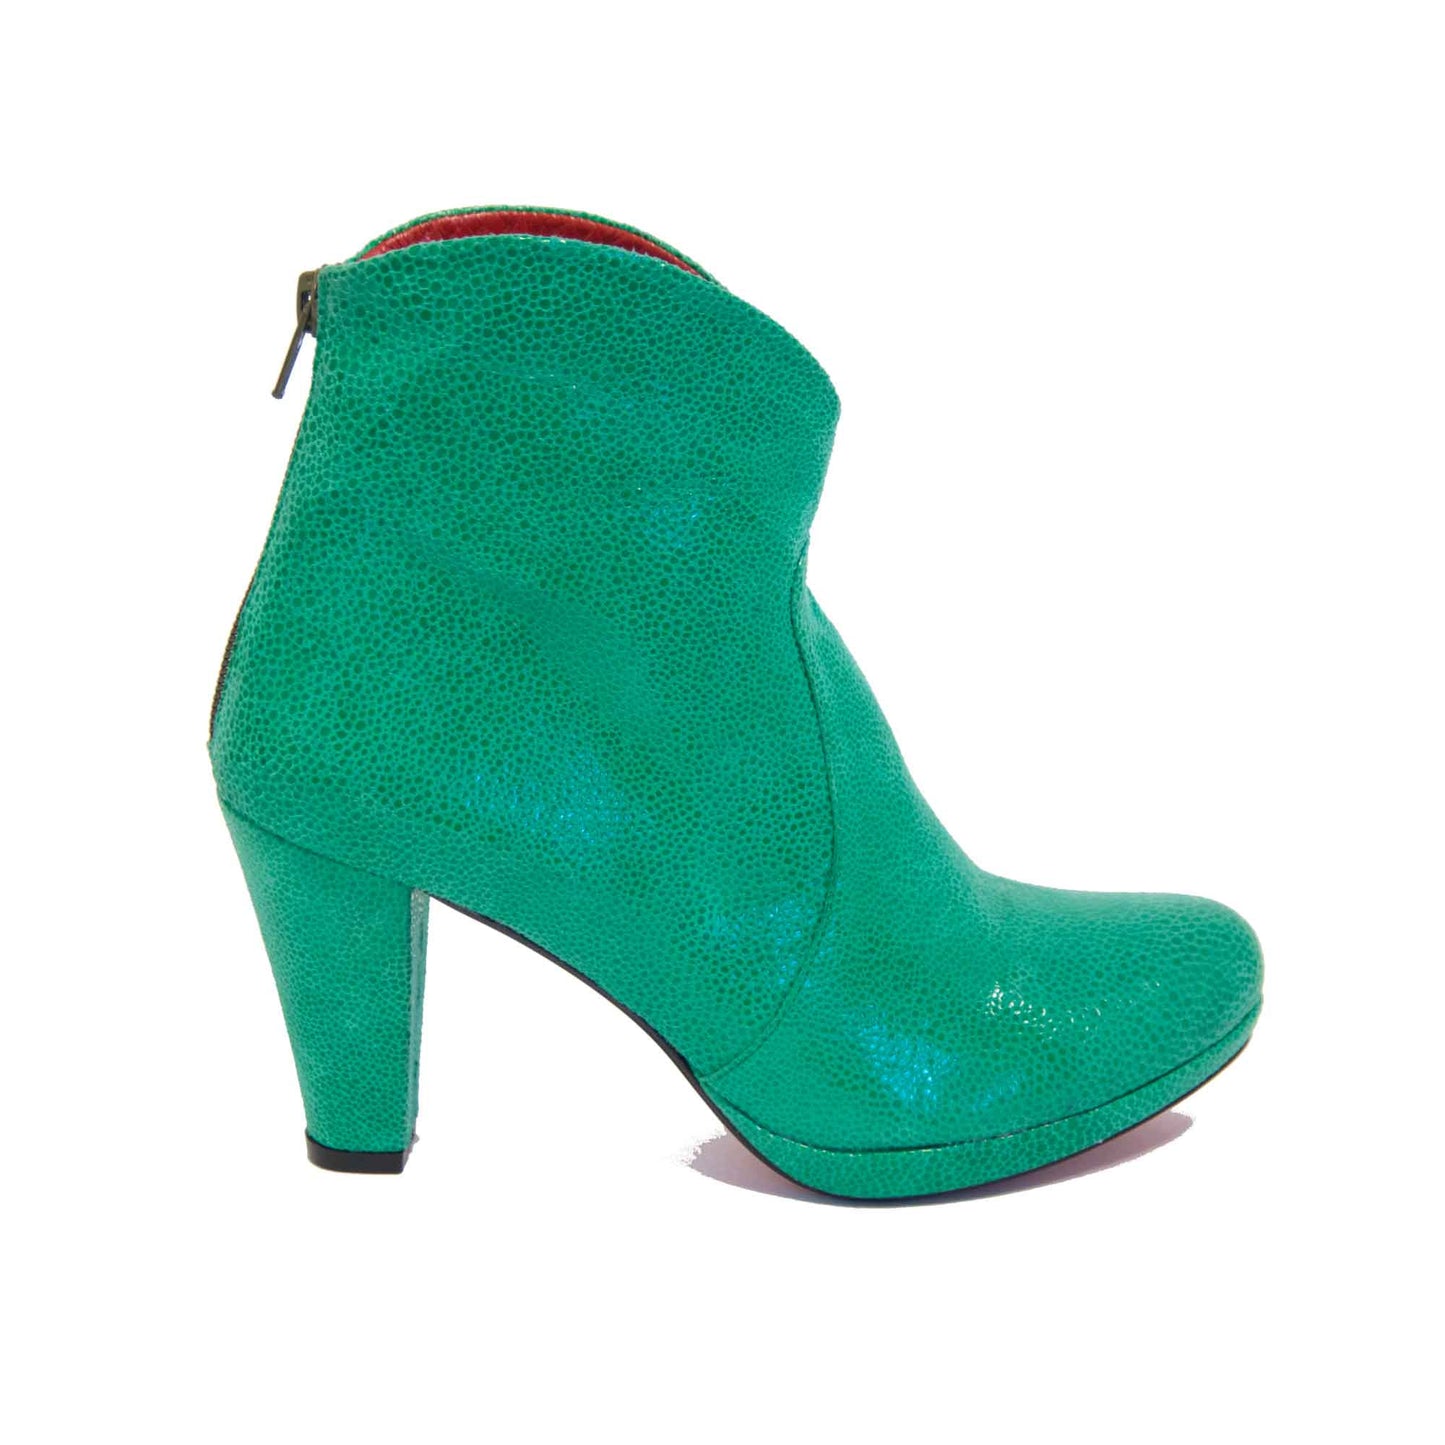 Collette Short Shiny Mint Green Boot